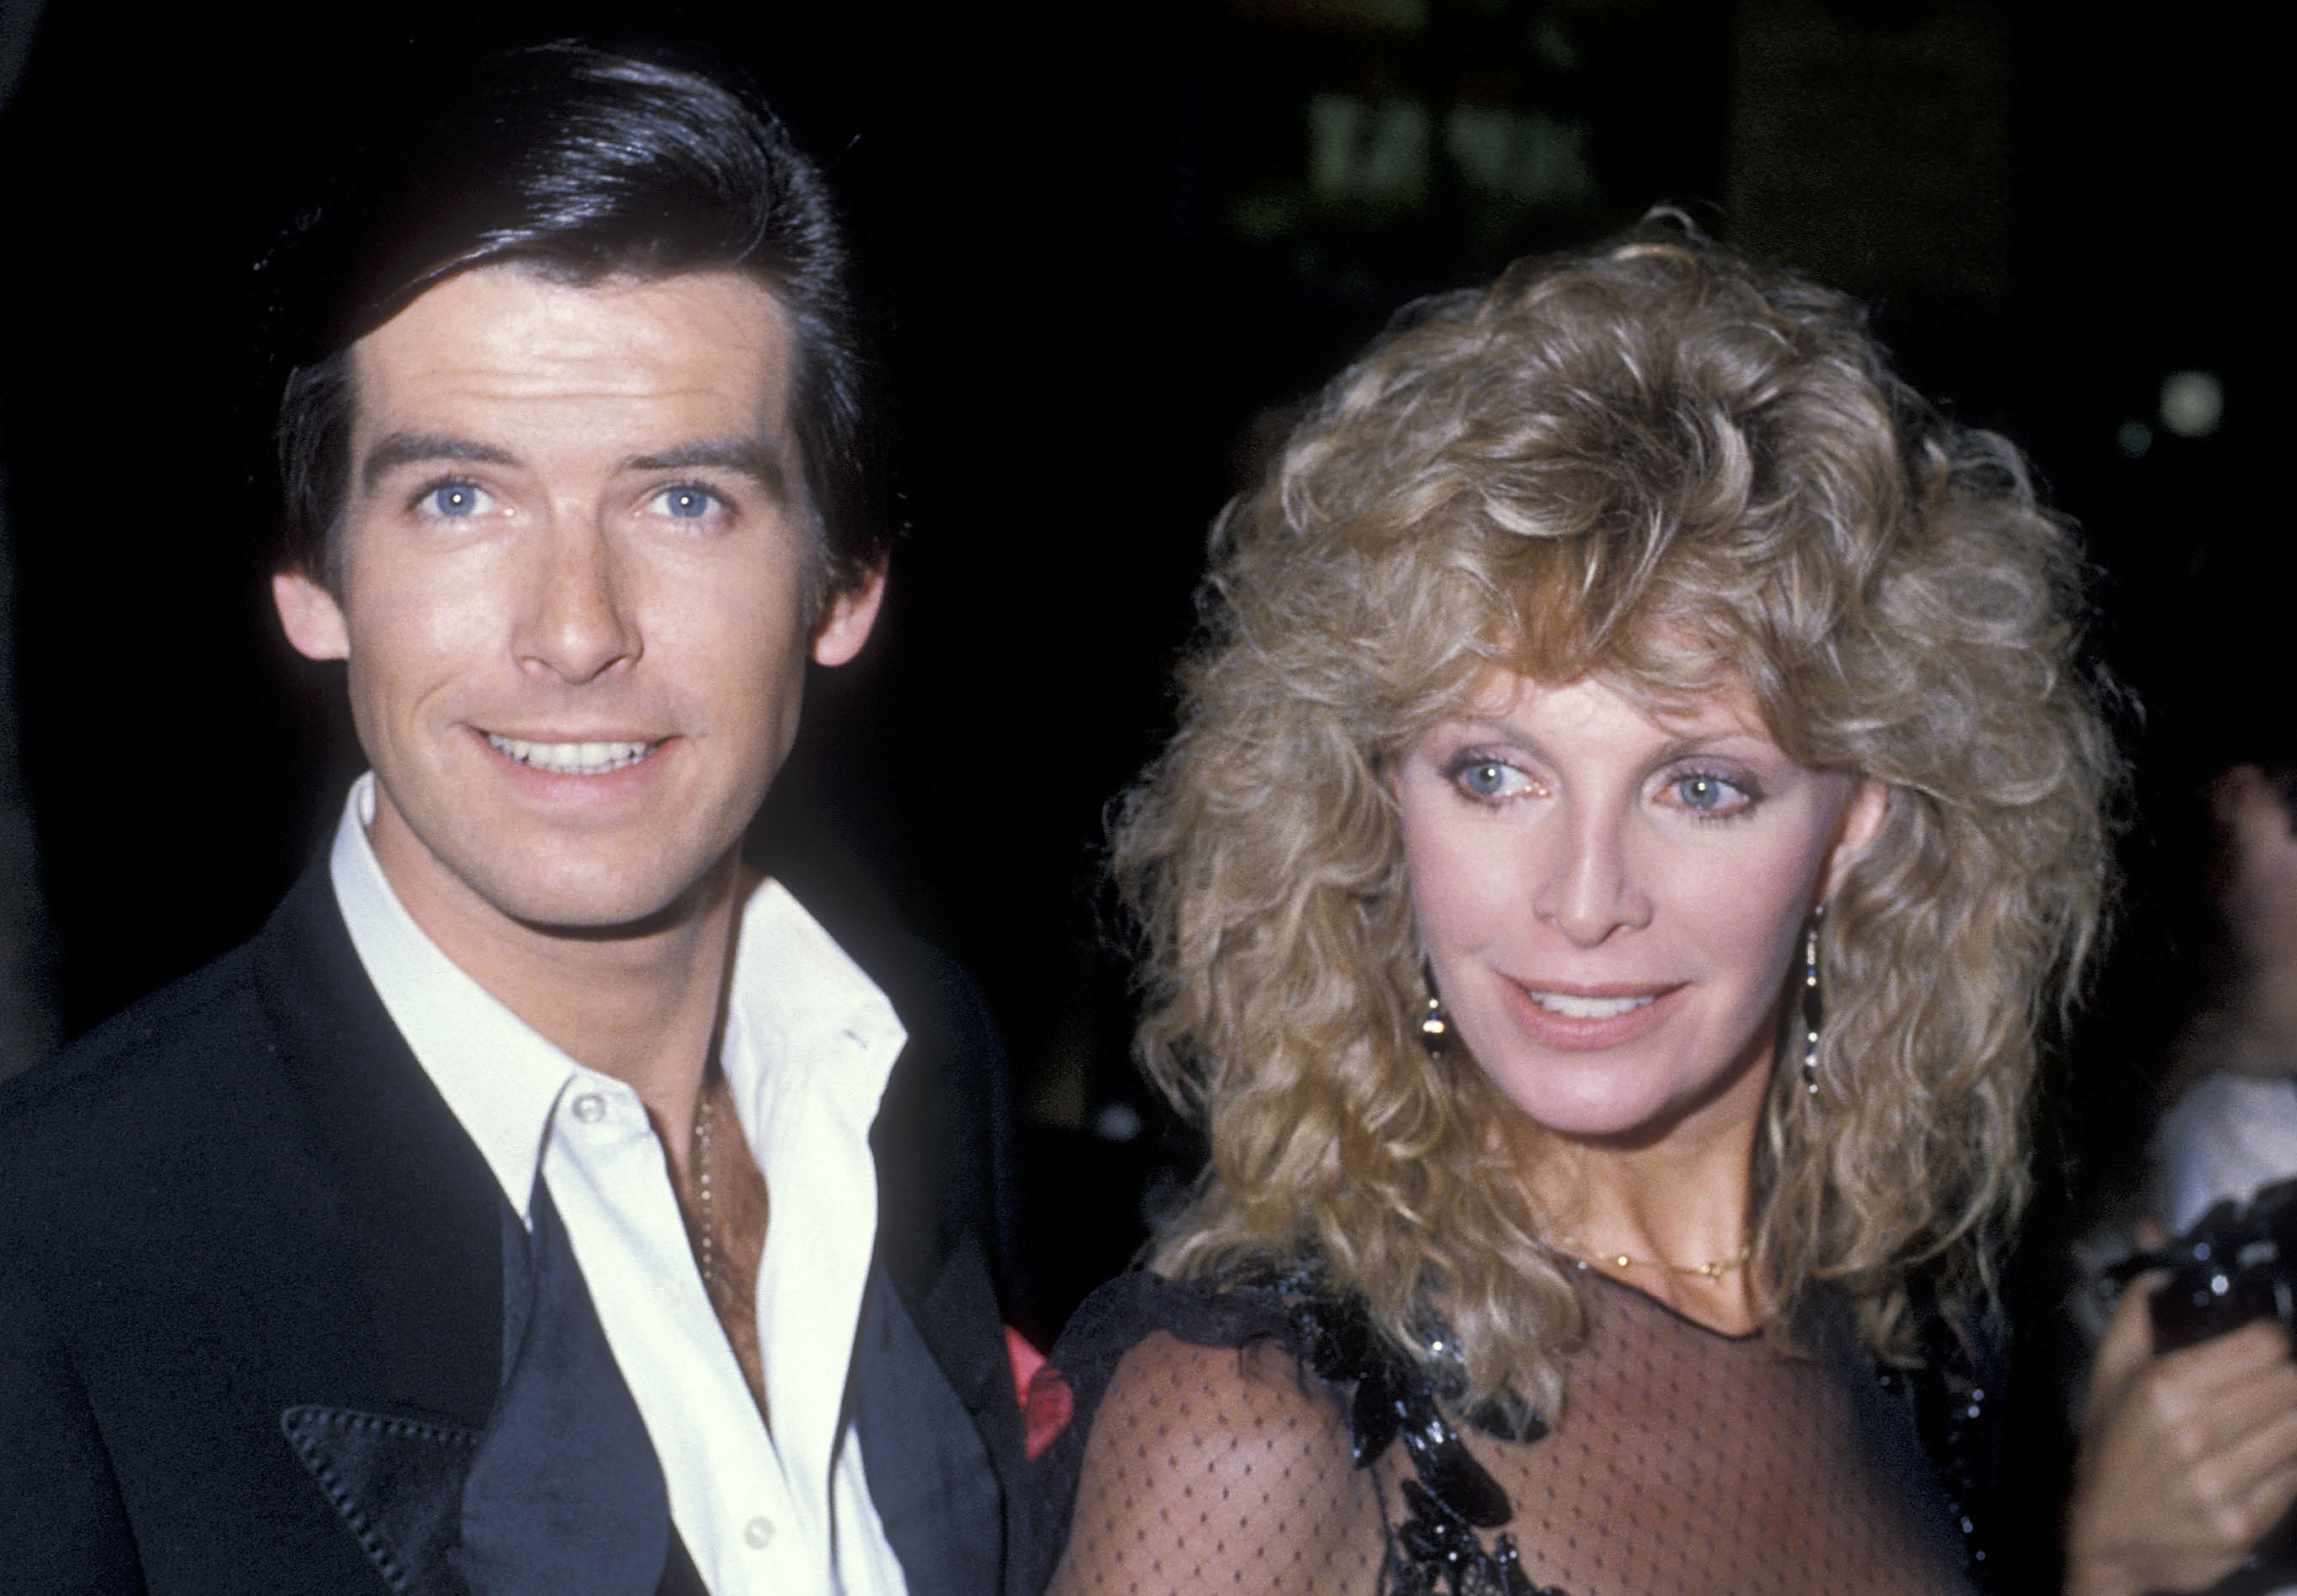 <p><span>In December 1980, Pierce Brosnan married his first wife, Cassandra Harris, with whom he shared a son, Sean, as well as her two children from a previous relationship, Charlotte and Chris, whom Pierce adopted after their biological father passed away. In 1987, Cassandra was diagnosed with ovarian cancer. She passed away at 43 on Dec. 28, 1991, leaving the "Remington Steele" and James Bond actor a widower. (Sadly, daughter Charlotte succumbed to the same disease in 2013.) Pierce went on to find love again with Keely Shaye Smith, whom he married in 2001; they share two sons. </span></p>